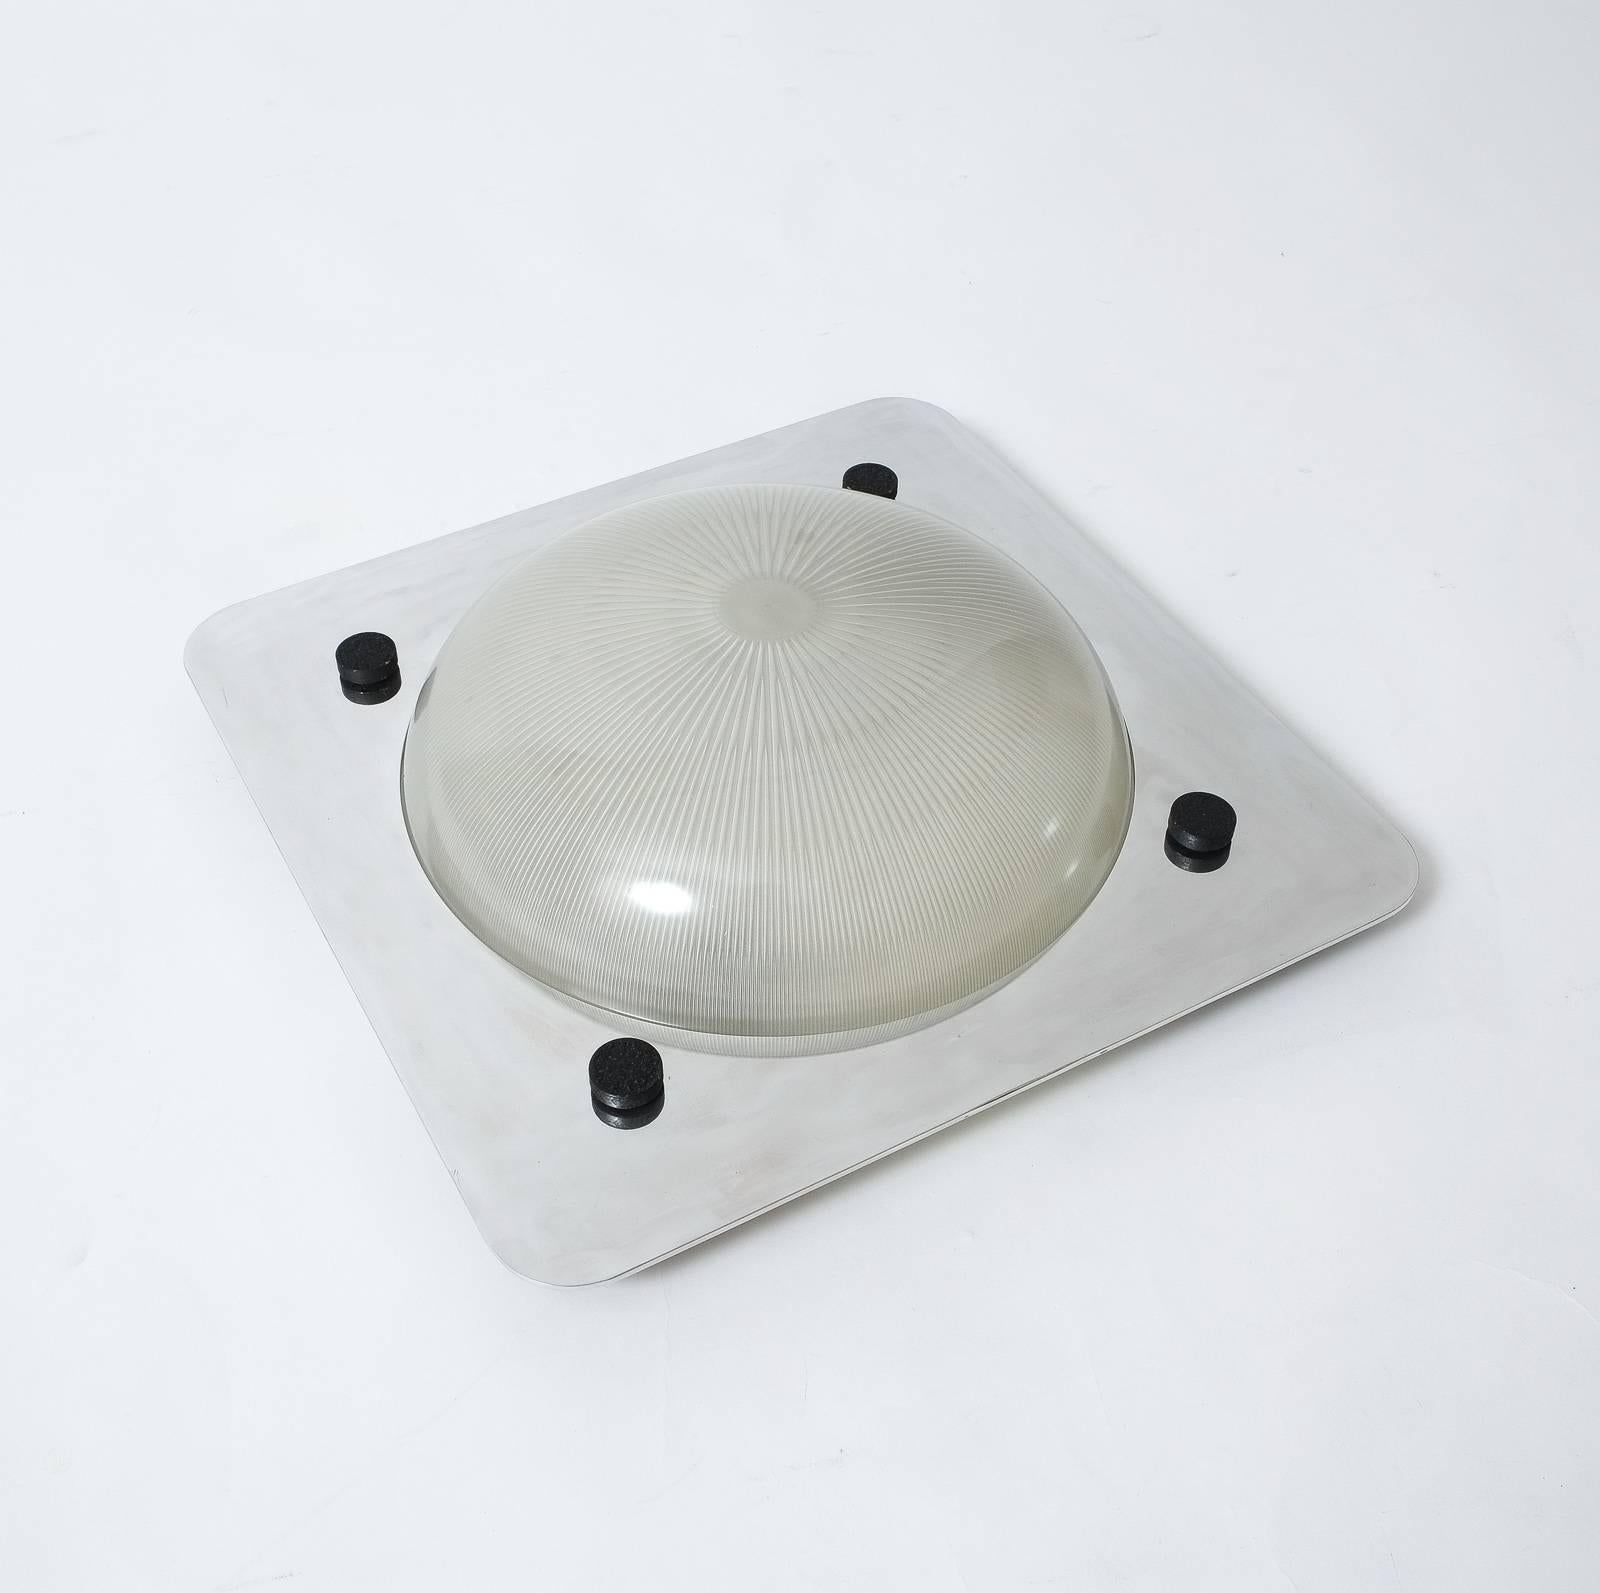 Very elegant ceiling fixture or wall light designed by Sergio Mazza for Artemide. 
We have two available in different sizes. White enameled metal base in with a mounted polished metal frame and glass dome. The condition is excellent vintage, newly